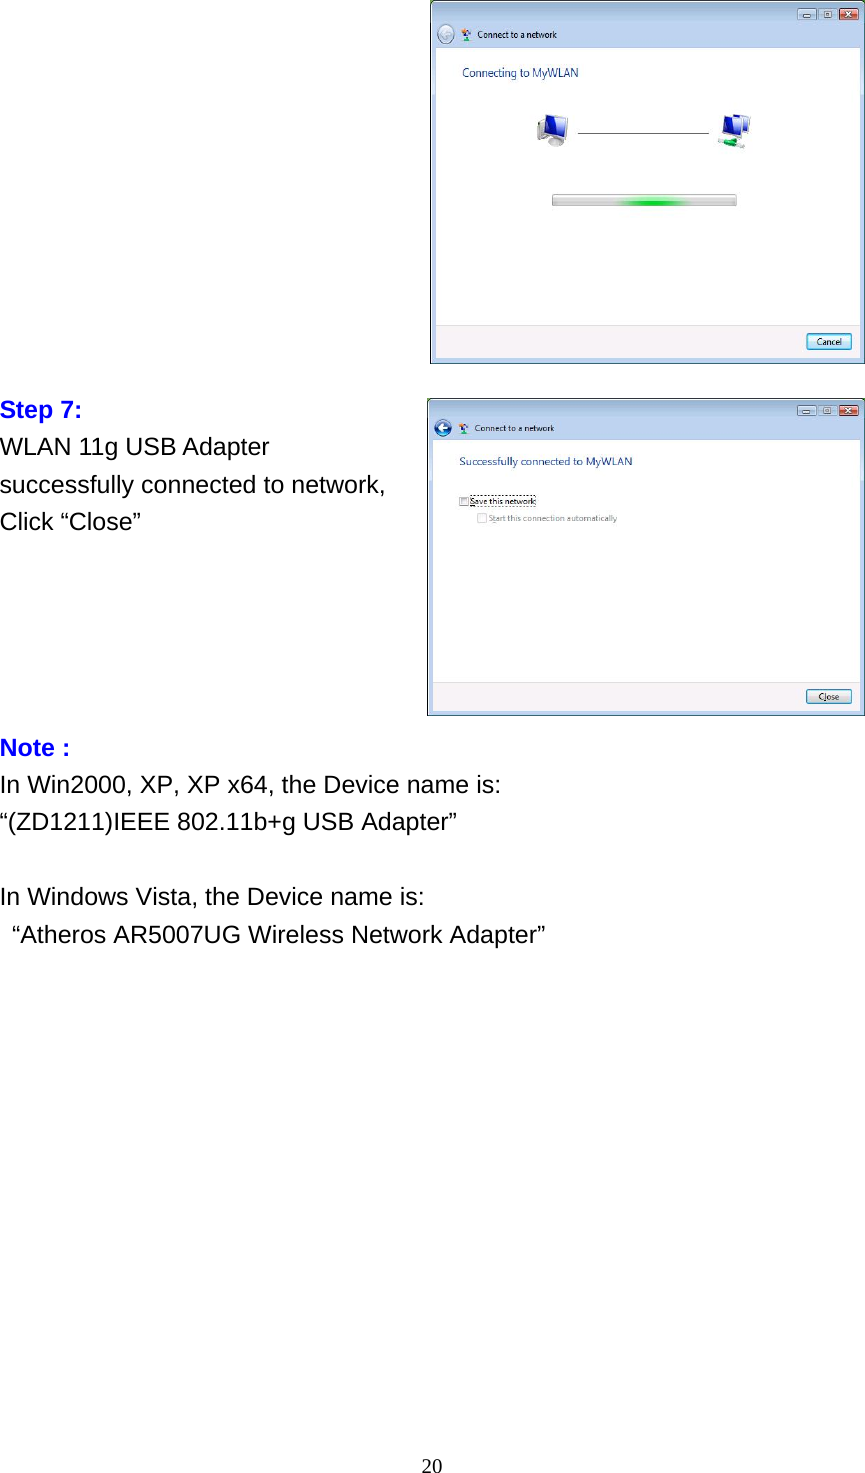    20            Step 7: WLAN 11g USB Adapter successfully connected to network, Click “Close”                                       Note : In Win2000, XP, XP x64, the Device name is:   “(ZD1211)IEEE 802.11b+g USB Adapter”  In Windows Vista, the Device name is:     “Atheros AR5007UG Wireless Network Adapter”                   